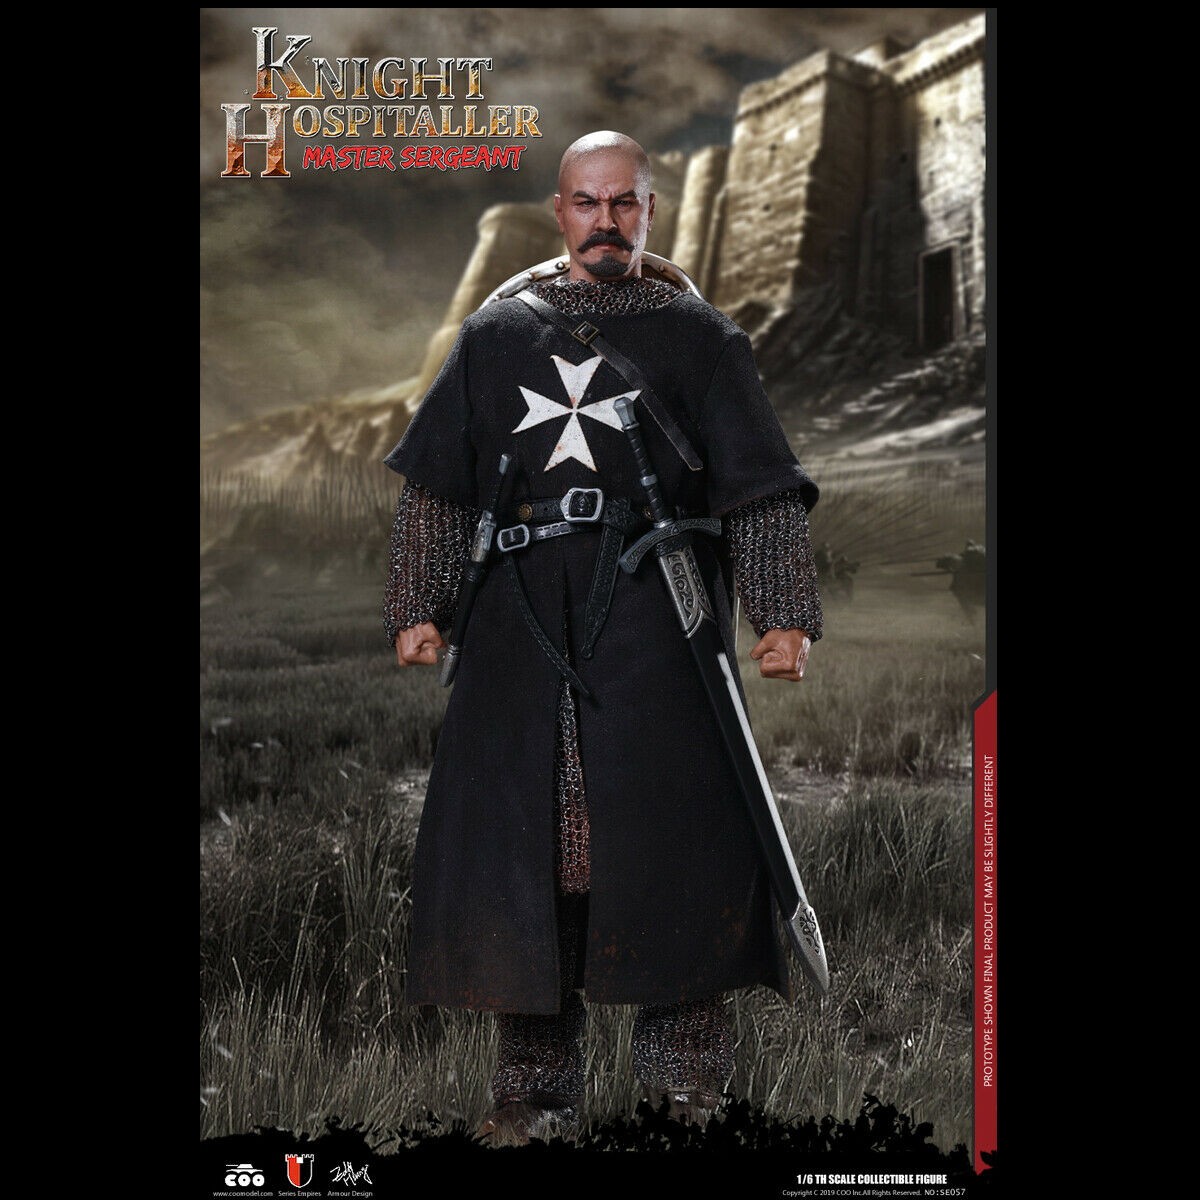 COOMODEL 1/6 SCALE SERIES OF EMPIRES KNIGHT TEMPLAR SE056